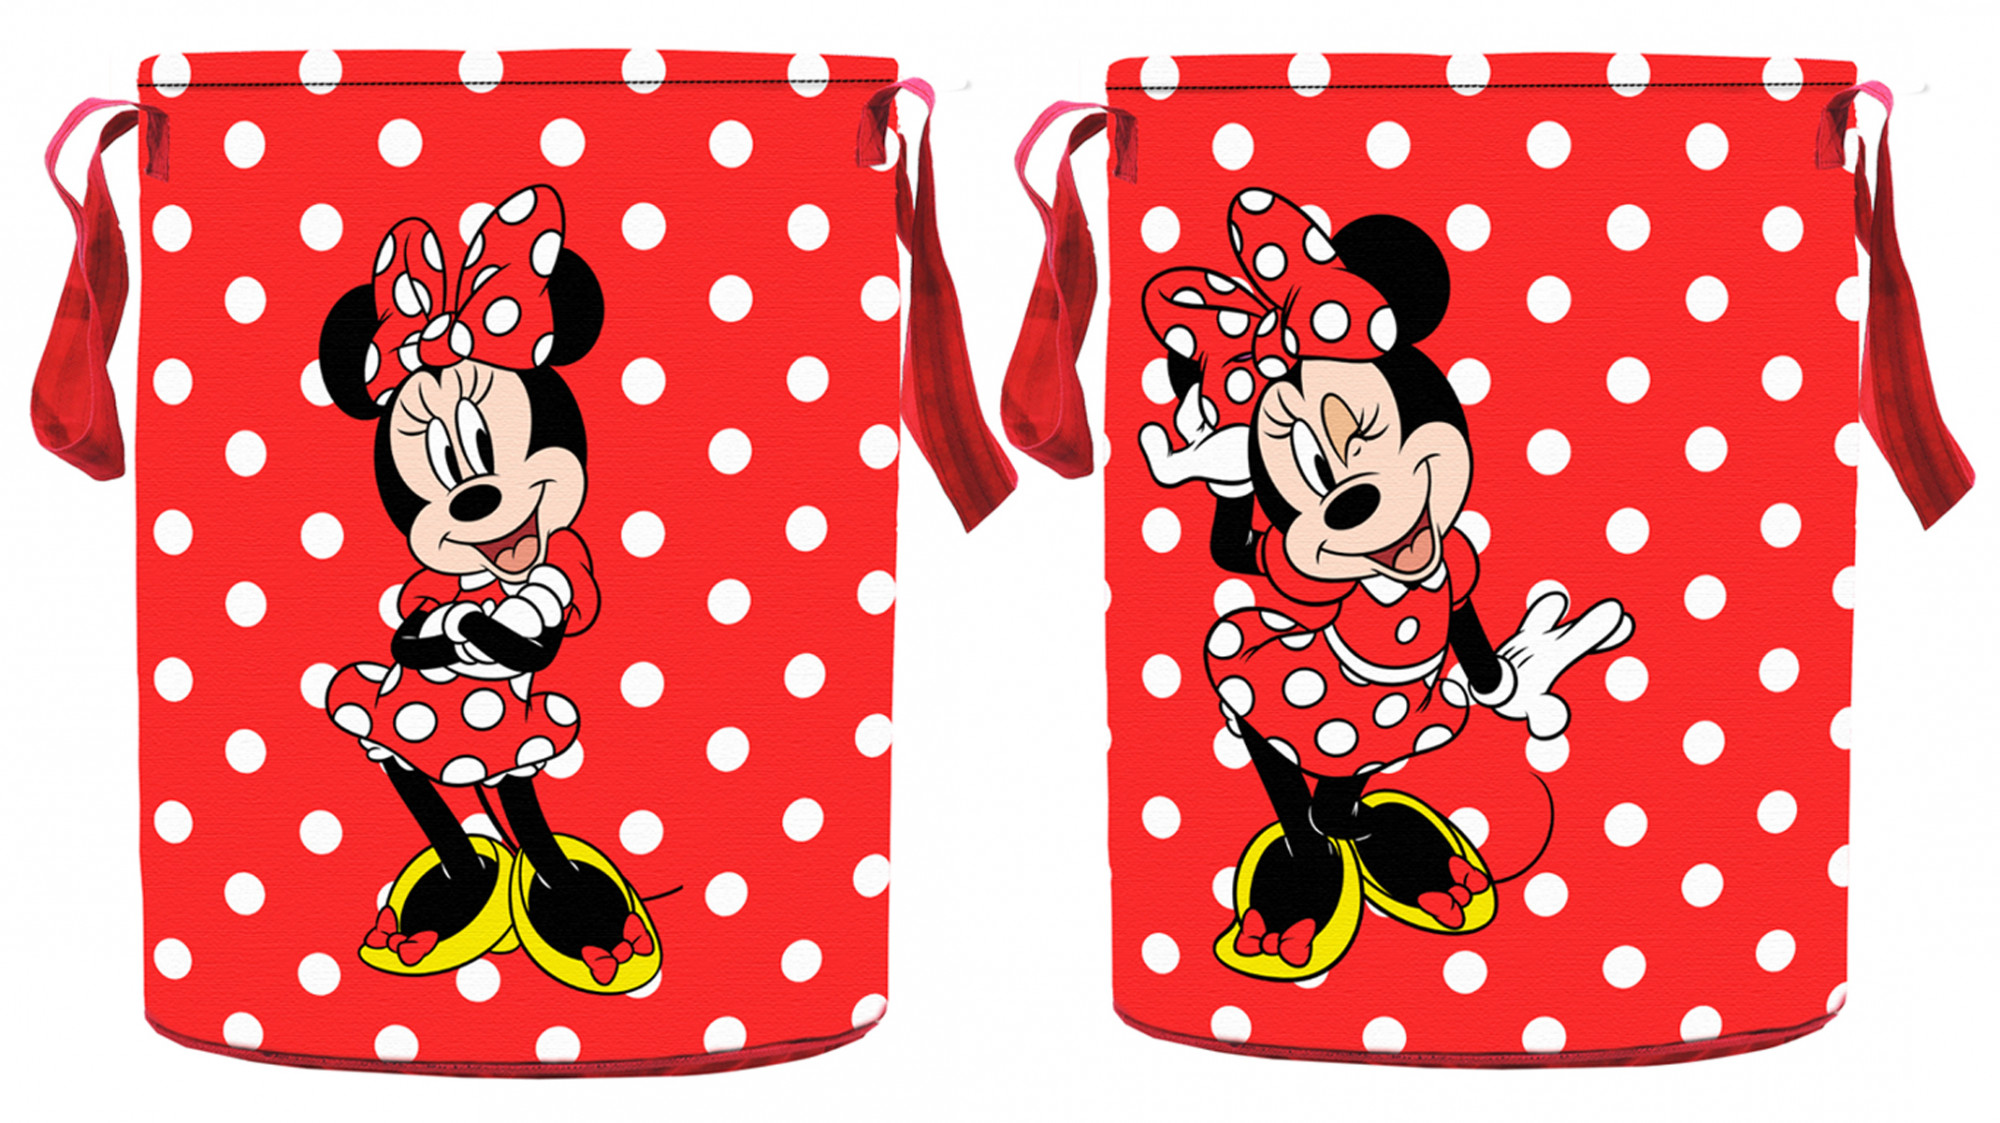 Kuber Industries Disney Minnie Print Non Woven Fabric Foldable Laundry Organiser With Handles (Red)